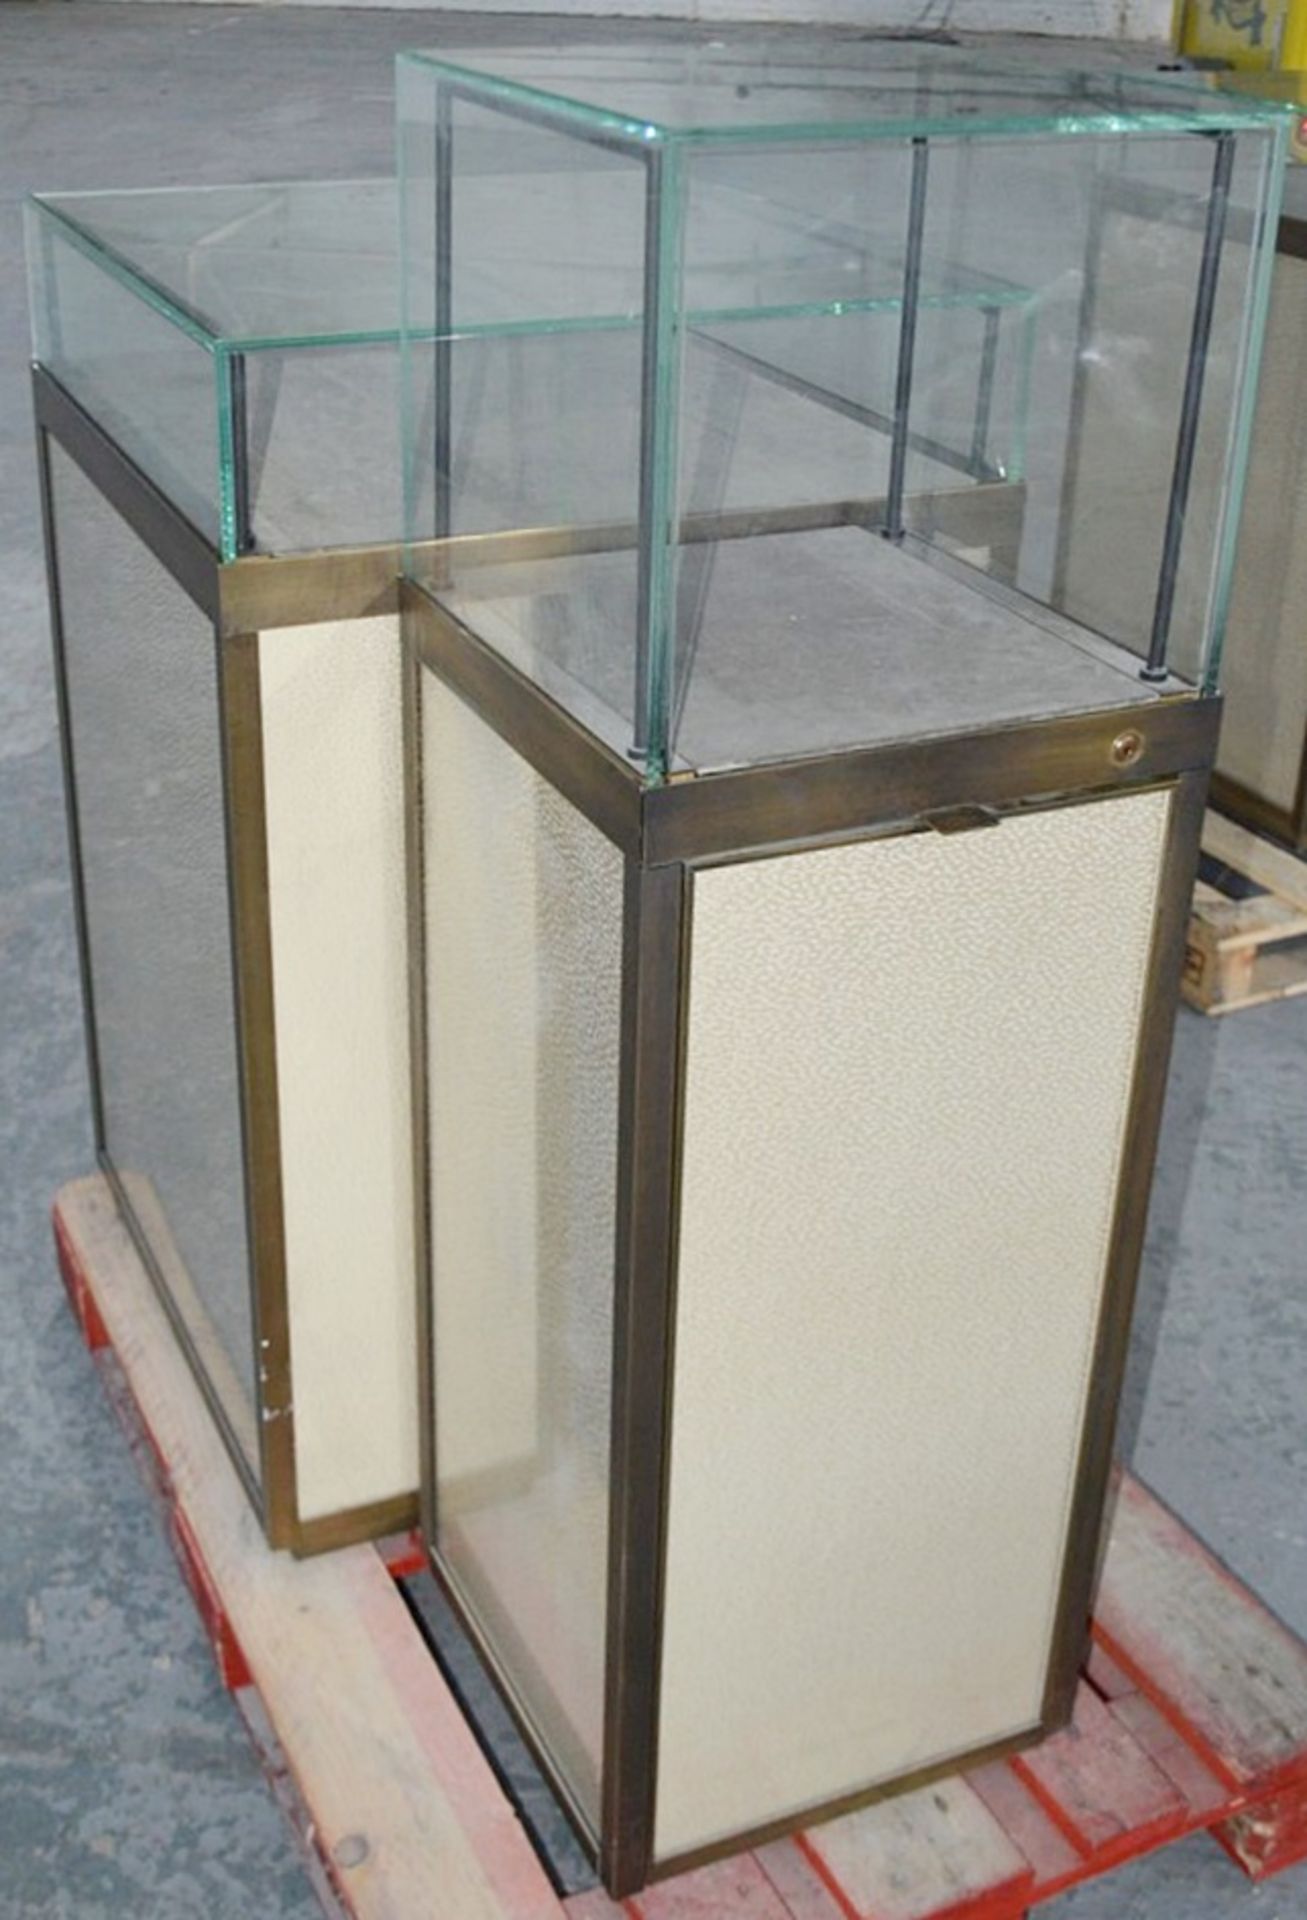 1 x Luxury Double Cabinet Glass Display Case - Dimensions: H124 x W100 x D65cm - Ex-Showroom Piece - Image 4 of 9